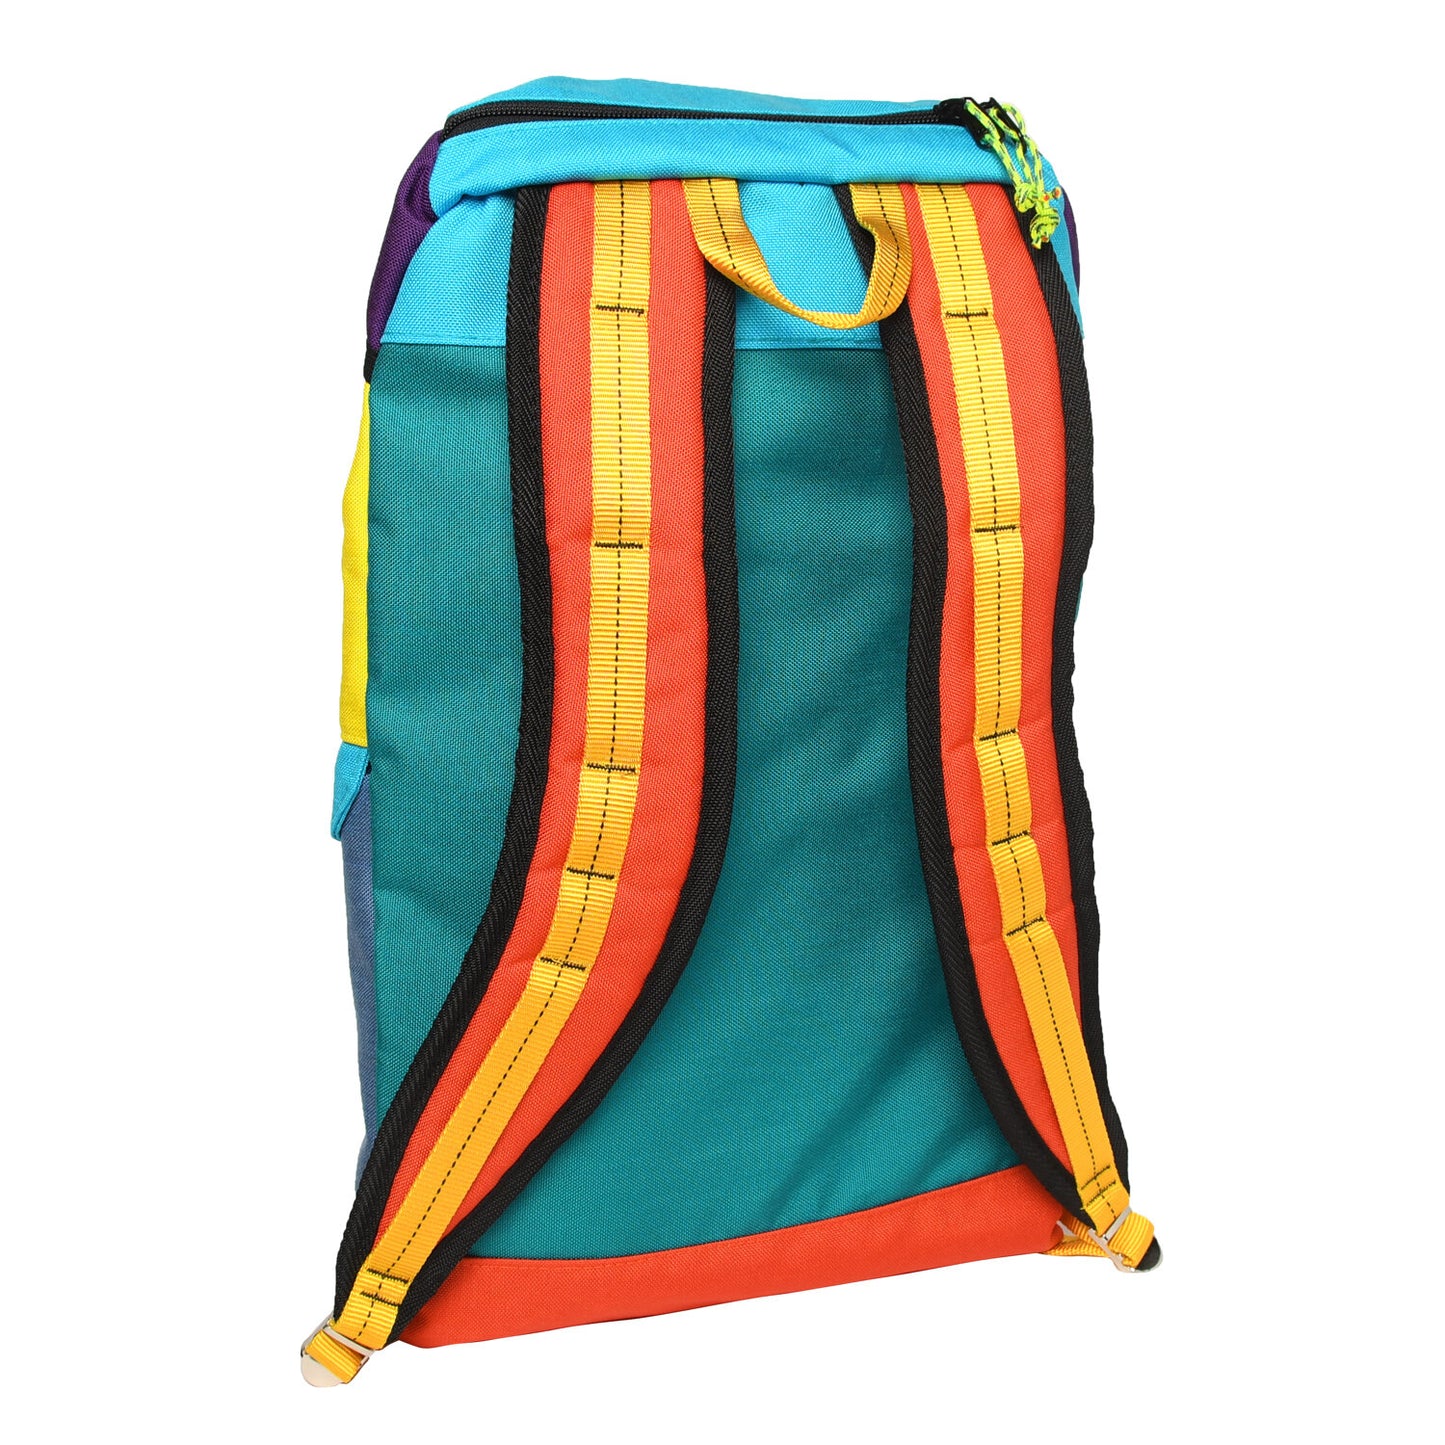 Epperson Mountaineering - Medium Climb Pack Turquoise Peacock